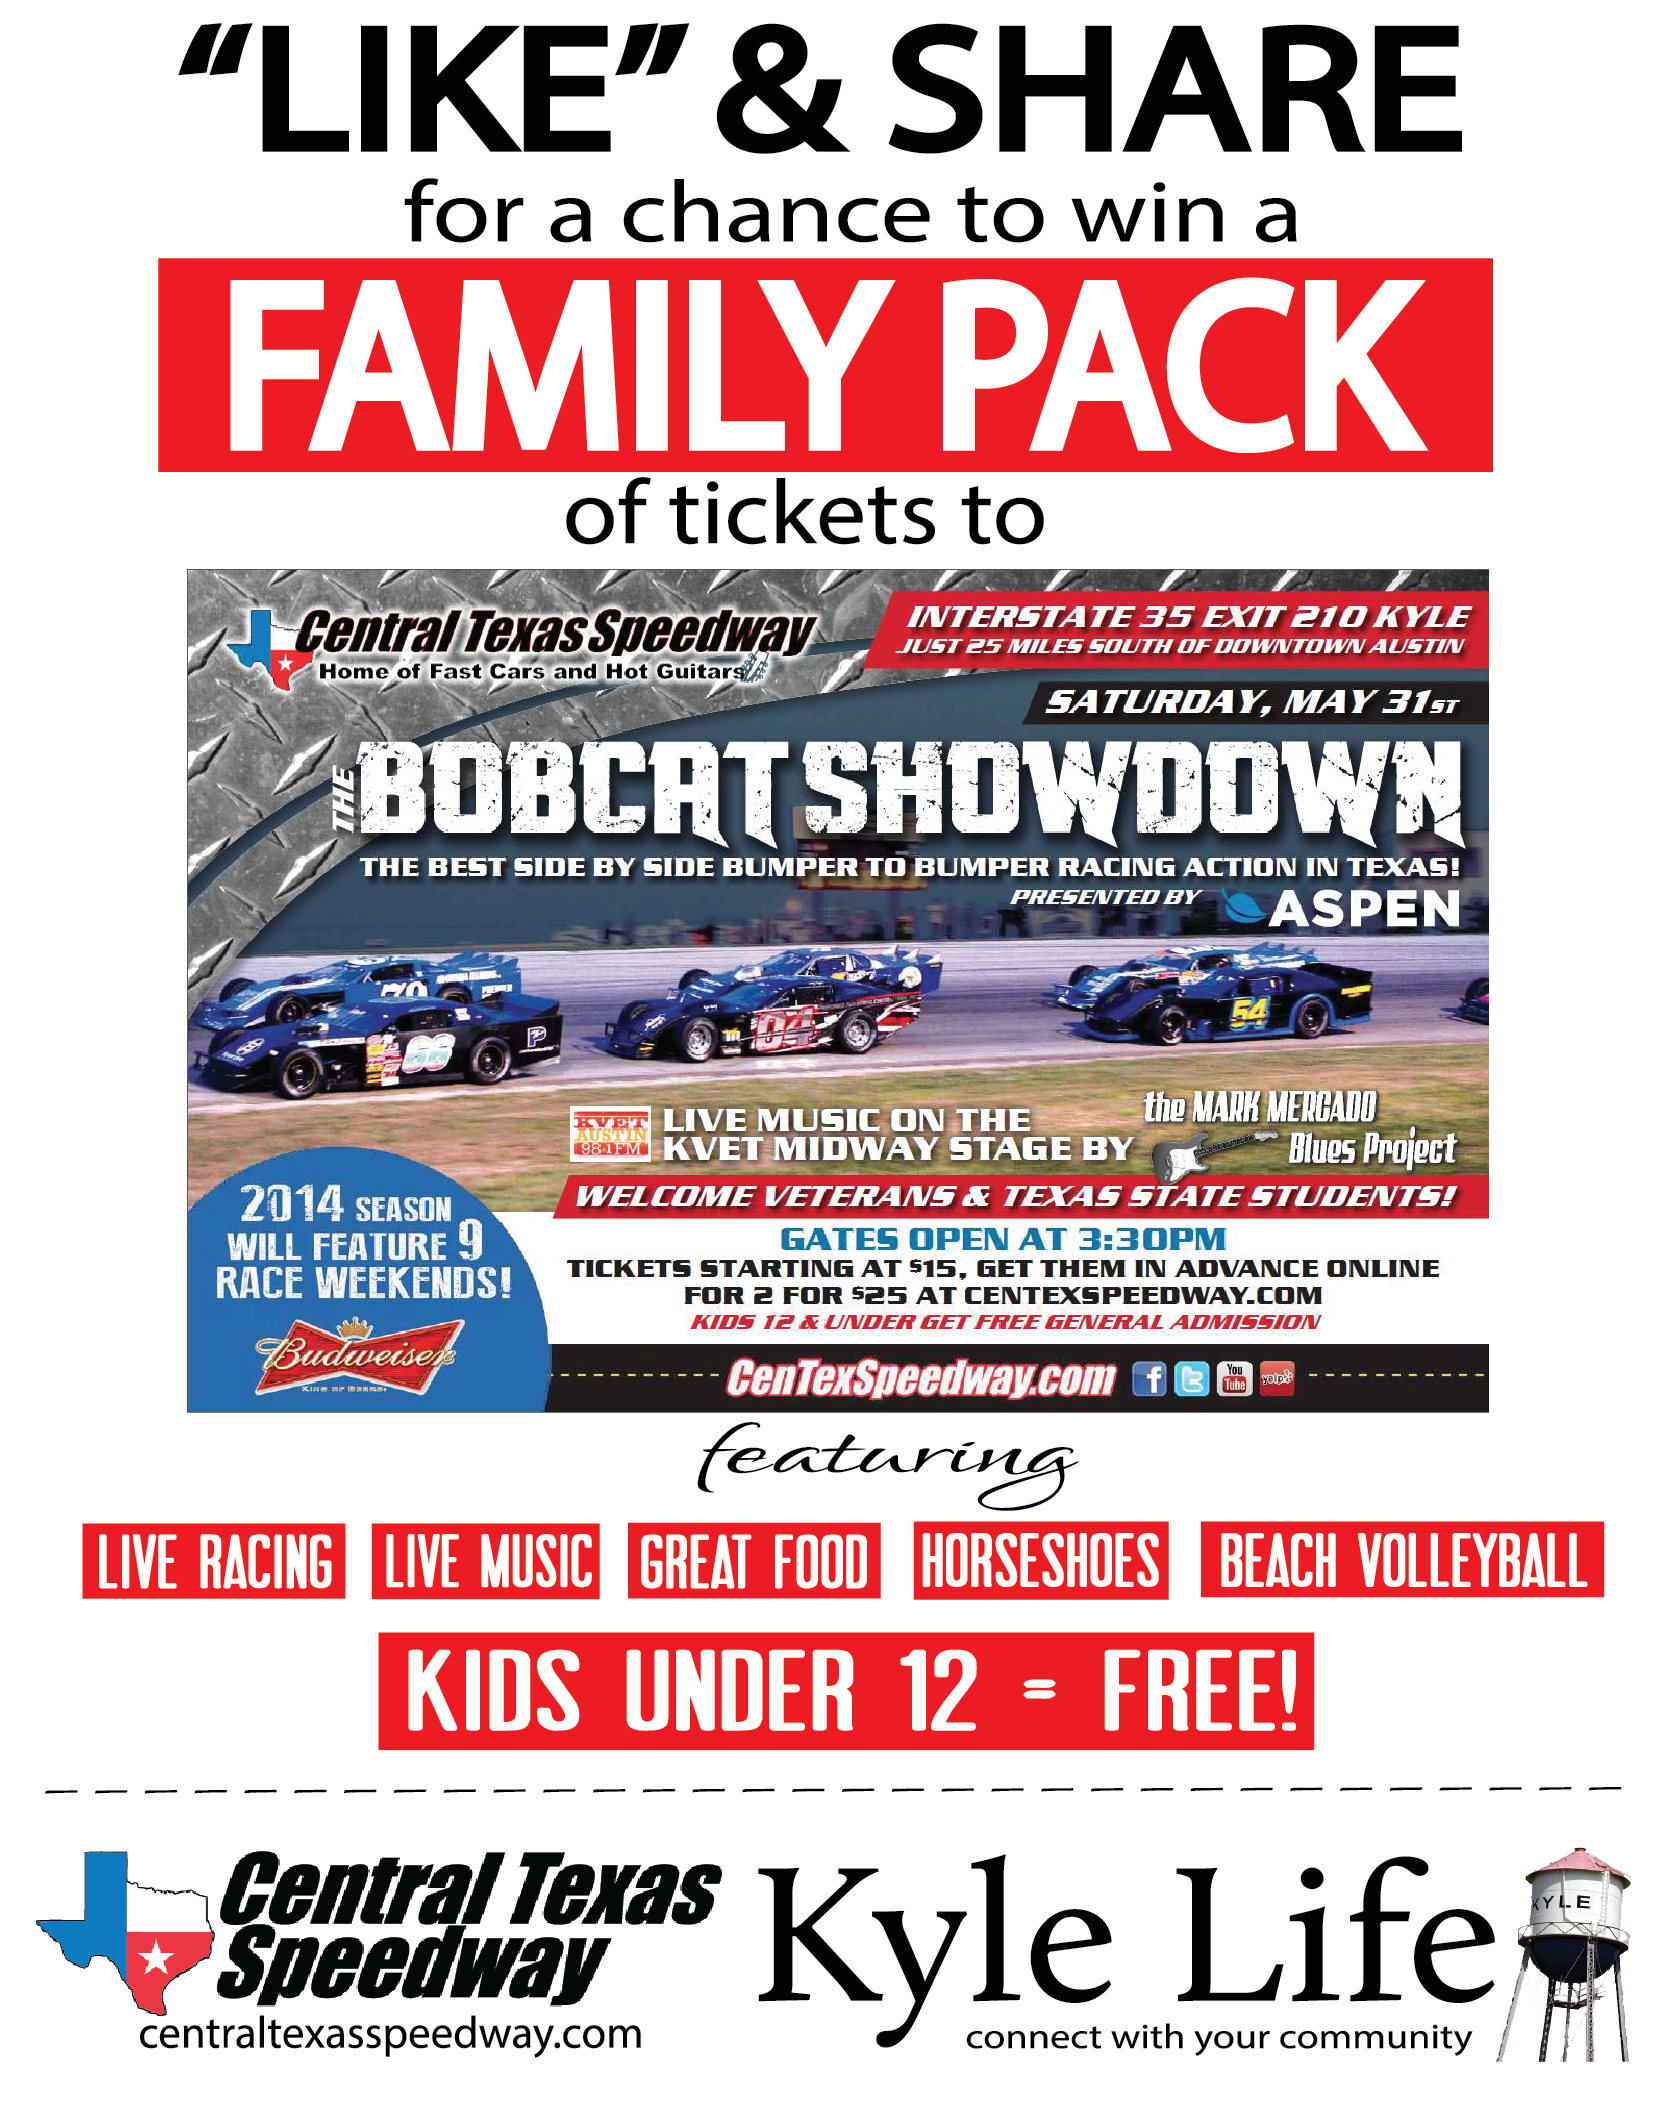 GIVEAWAY — Family Pack of Tickets to the Bobcat Showdown @ Central Texas Speedway!